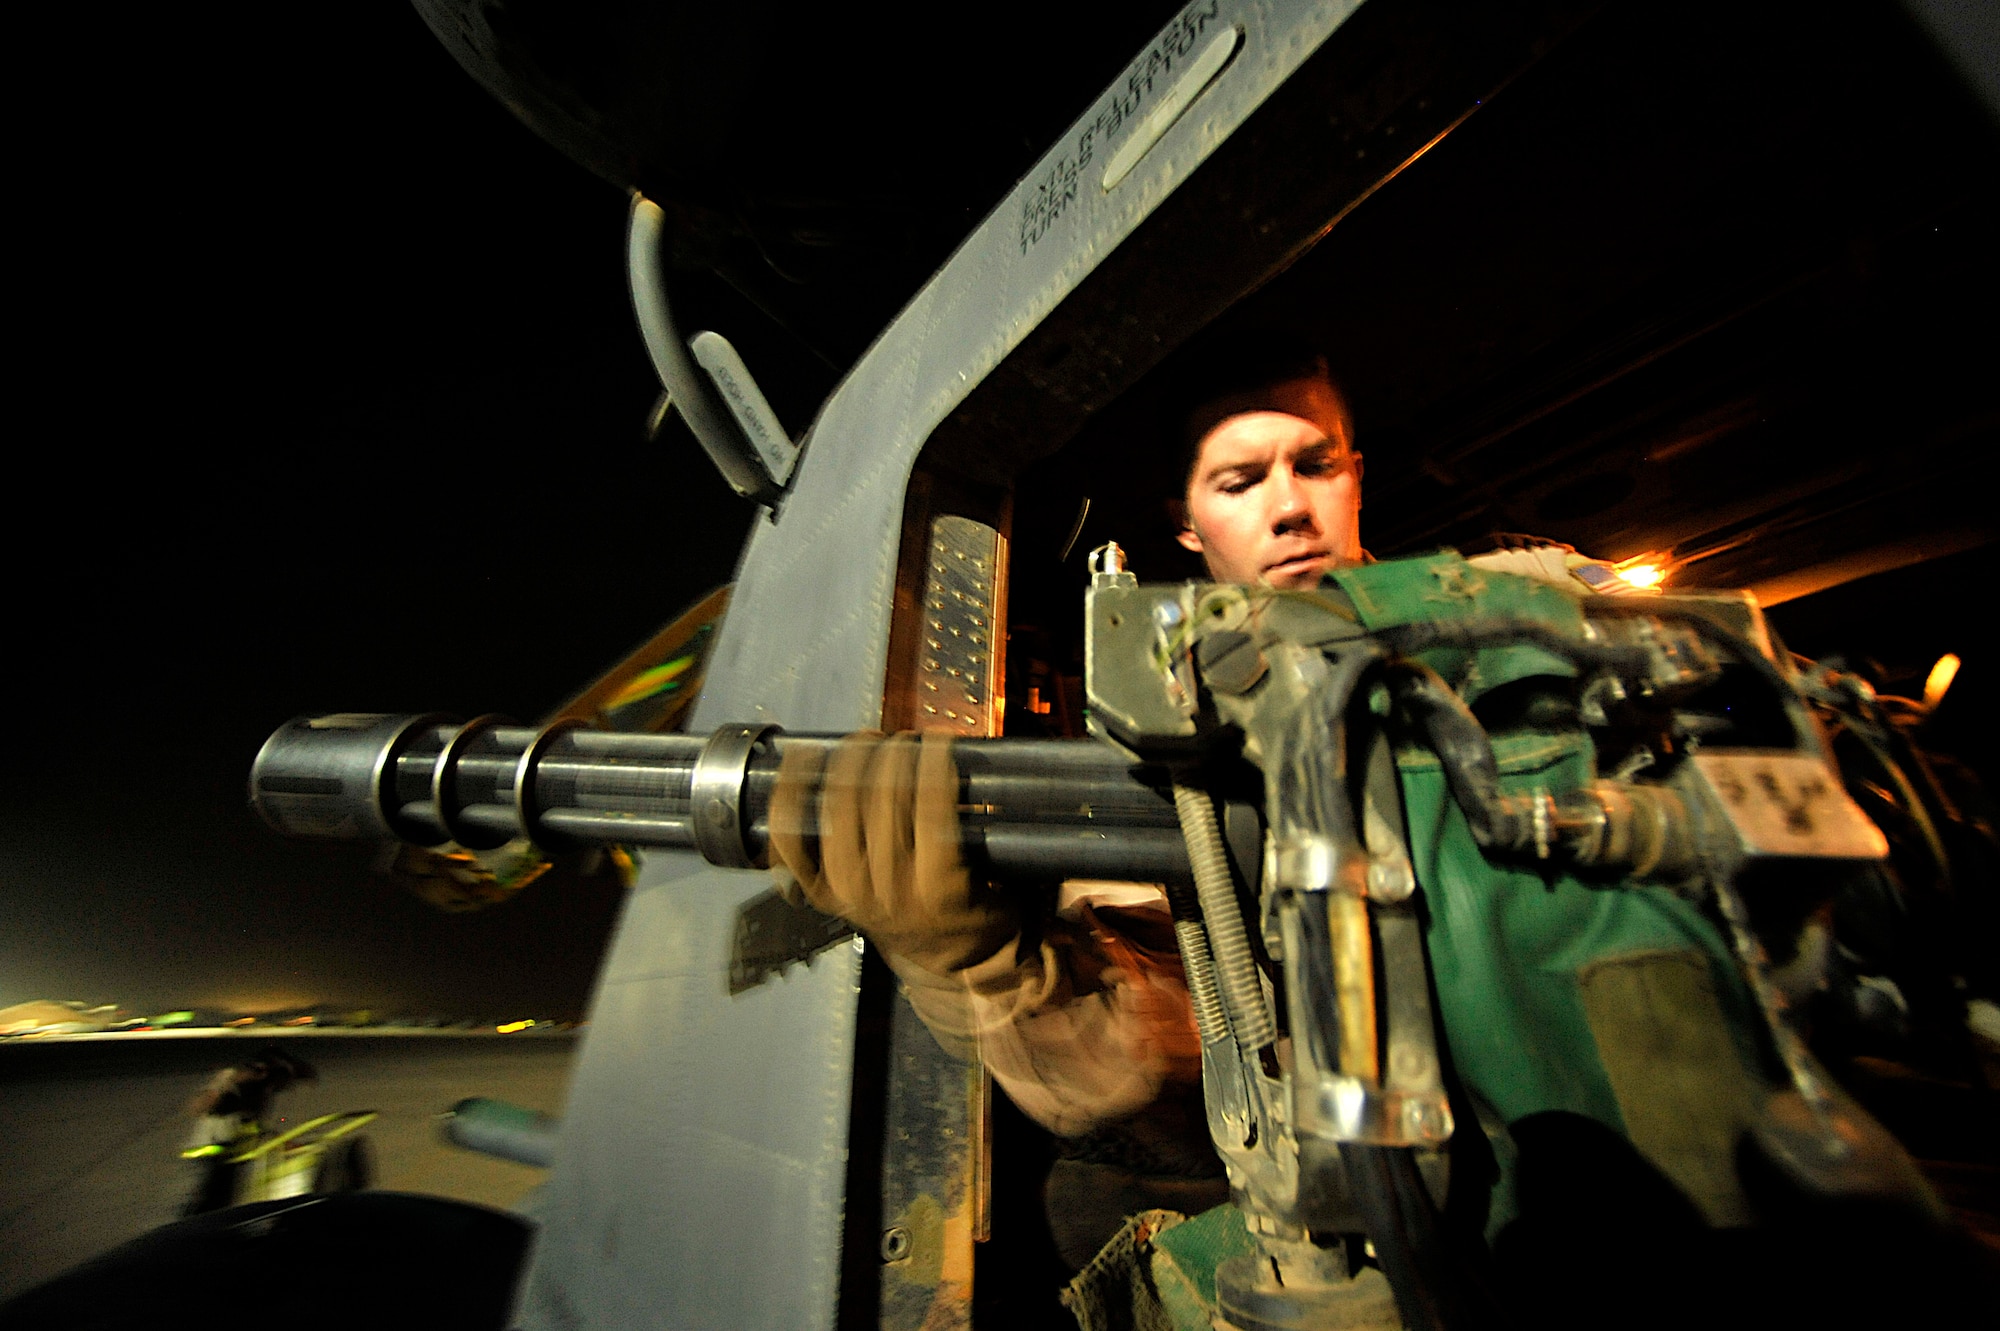 Tech. Sgt. Corey Fossbender checks a weapon gun prior to the last combat mission of the MH-53 Pave Low helicopter Sept. 27 in Iraq. The MH-53 is being retired after nearly 40 years of service to the Air Force. Sergeant Fossbender is an MH-53 aerial gunner from the 20th Expeditionary Special Operations Squadron. (U.S. Air Force photo/Staff Sgt. Aaron Allmon) 
